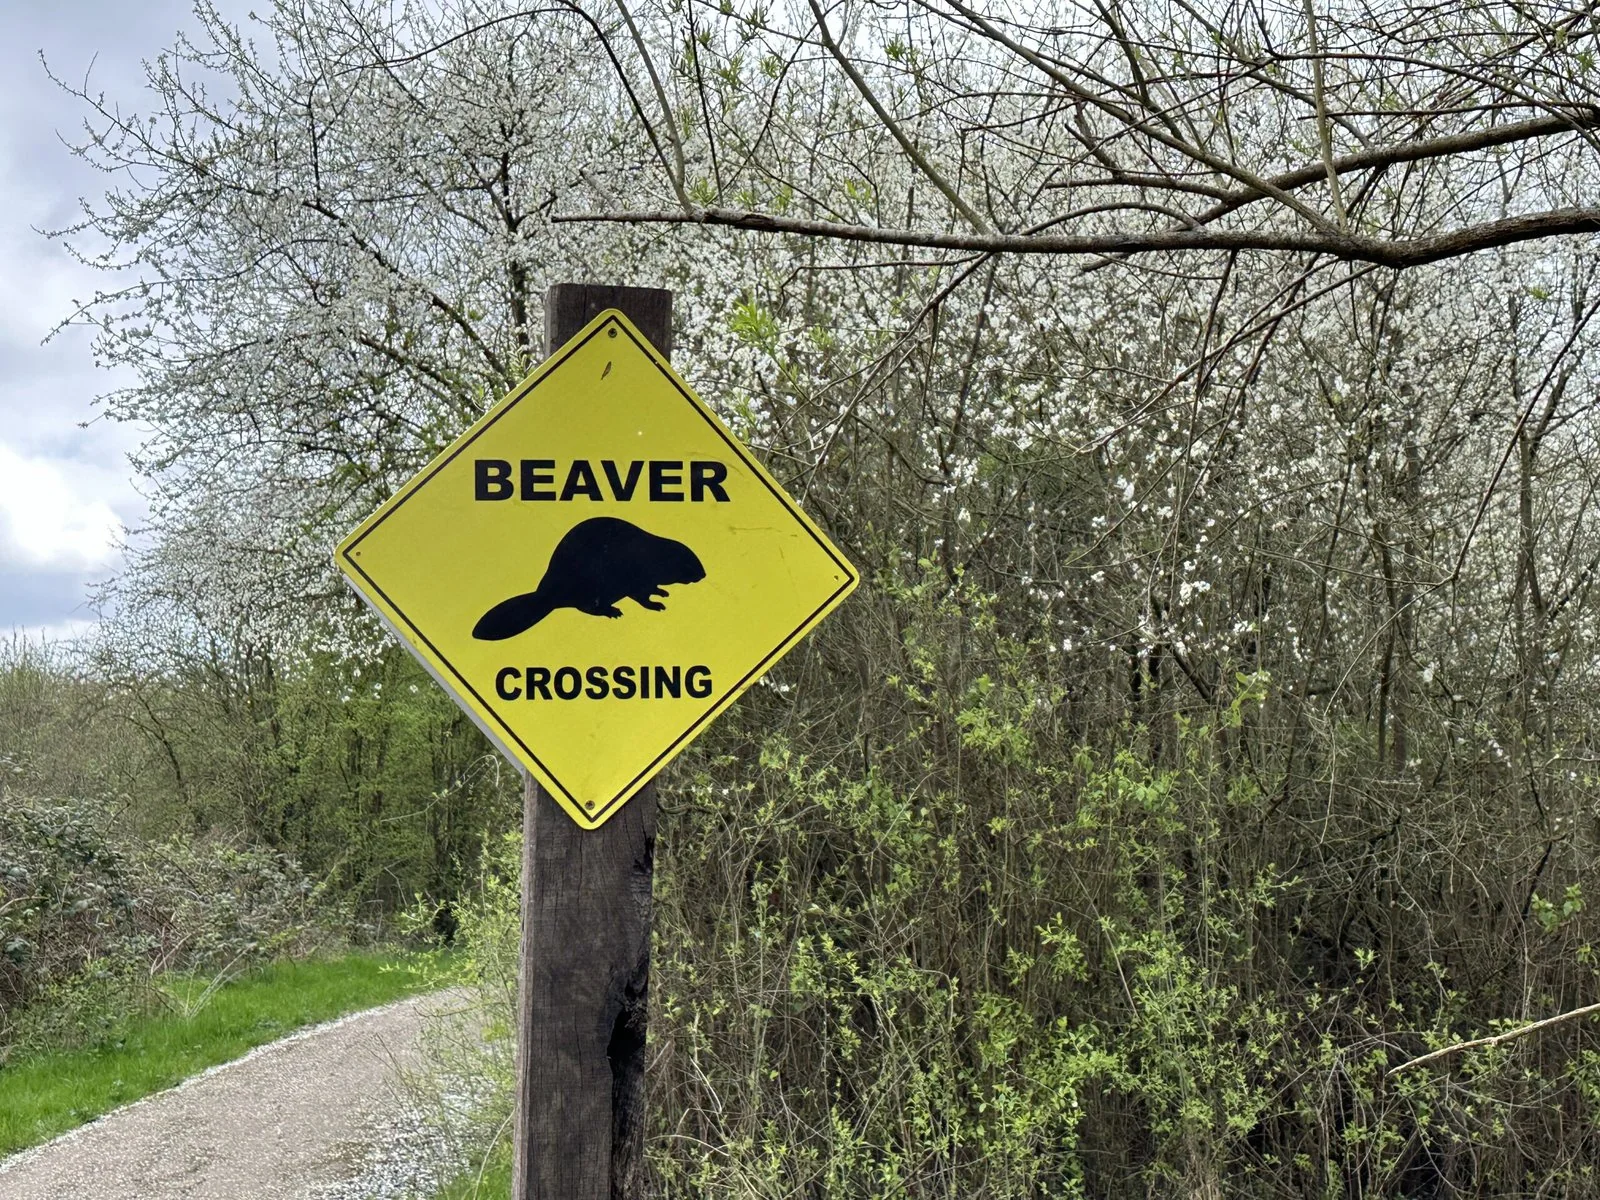 A sign in Paradise Fields says "Beaver Crossing" with an image of a beaver.